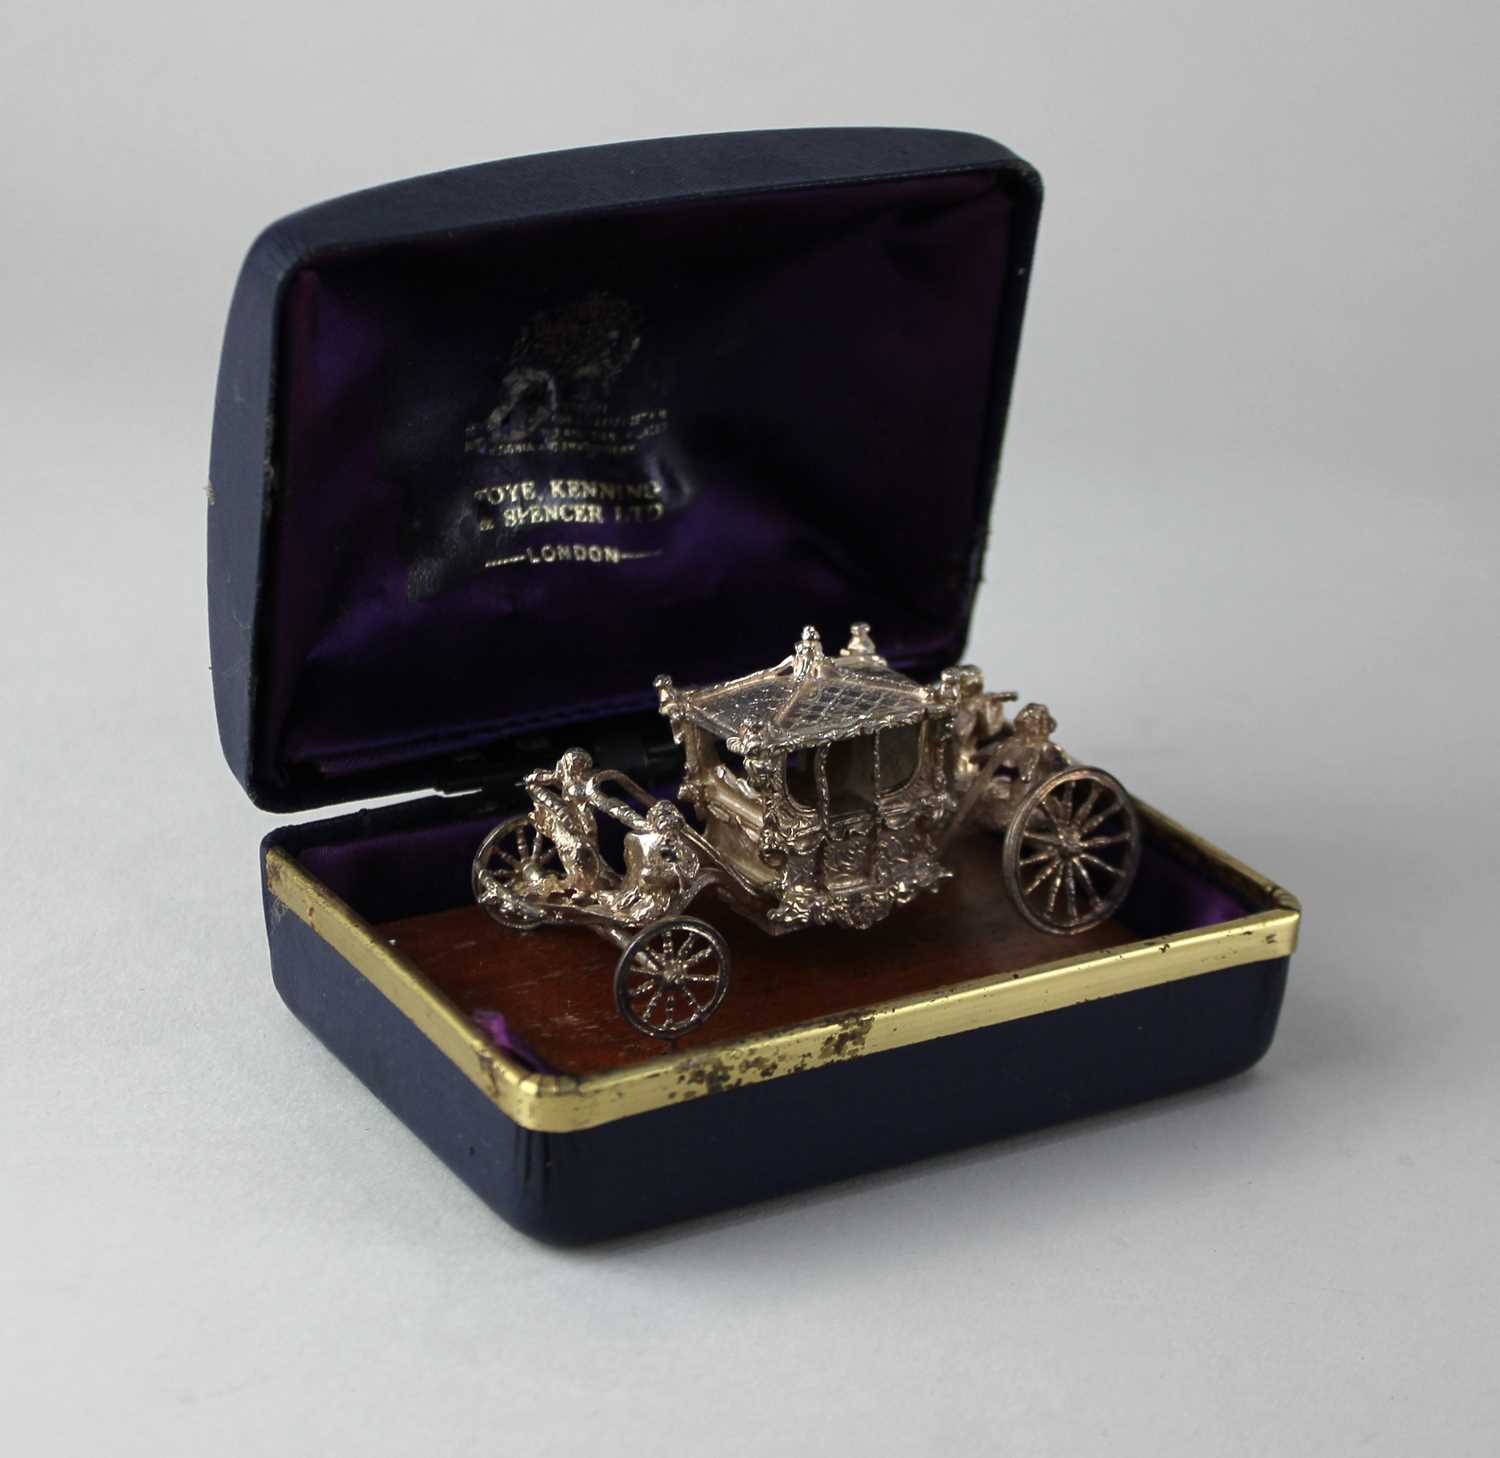 A Toye Kenning & Spencer Ltd. silver model of the Coronation Coach on wooden plinth in original